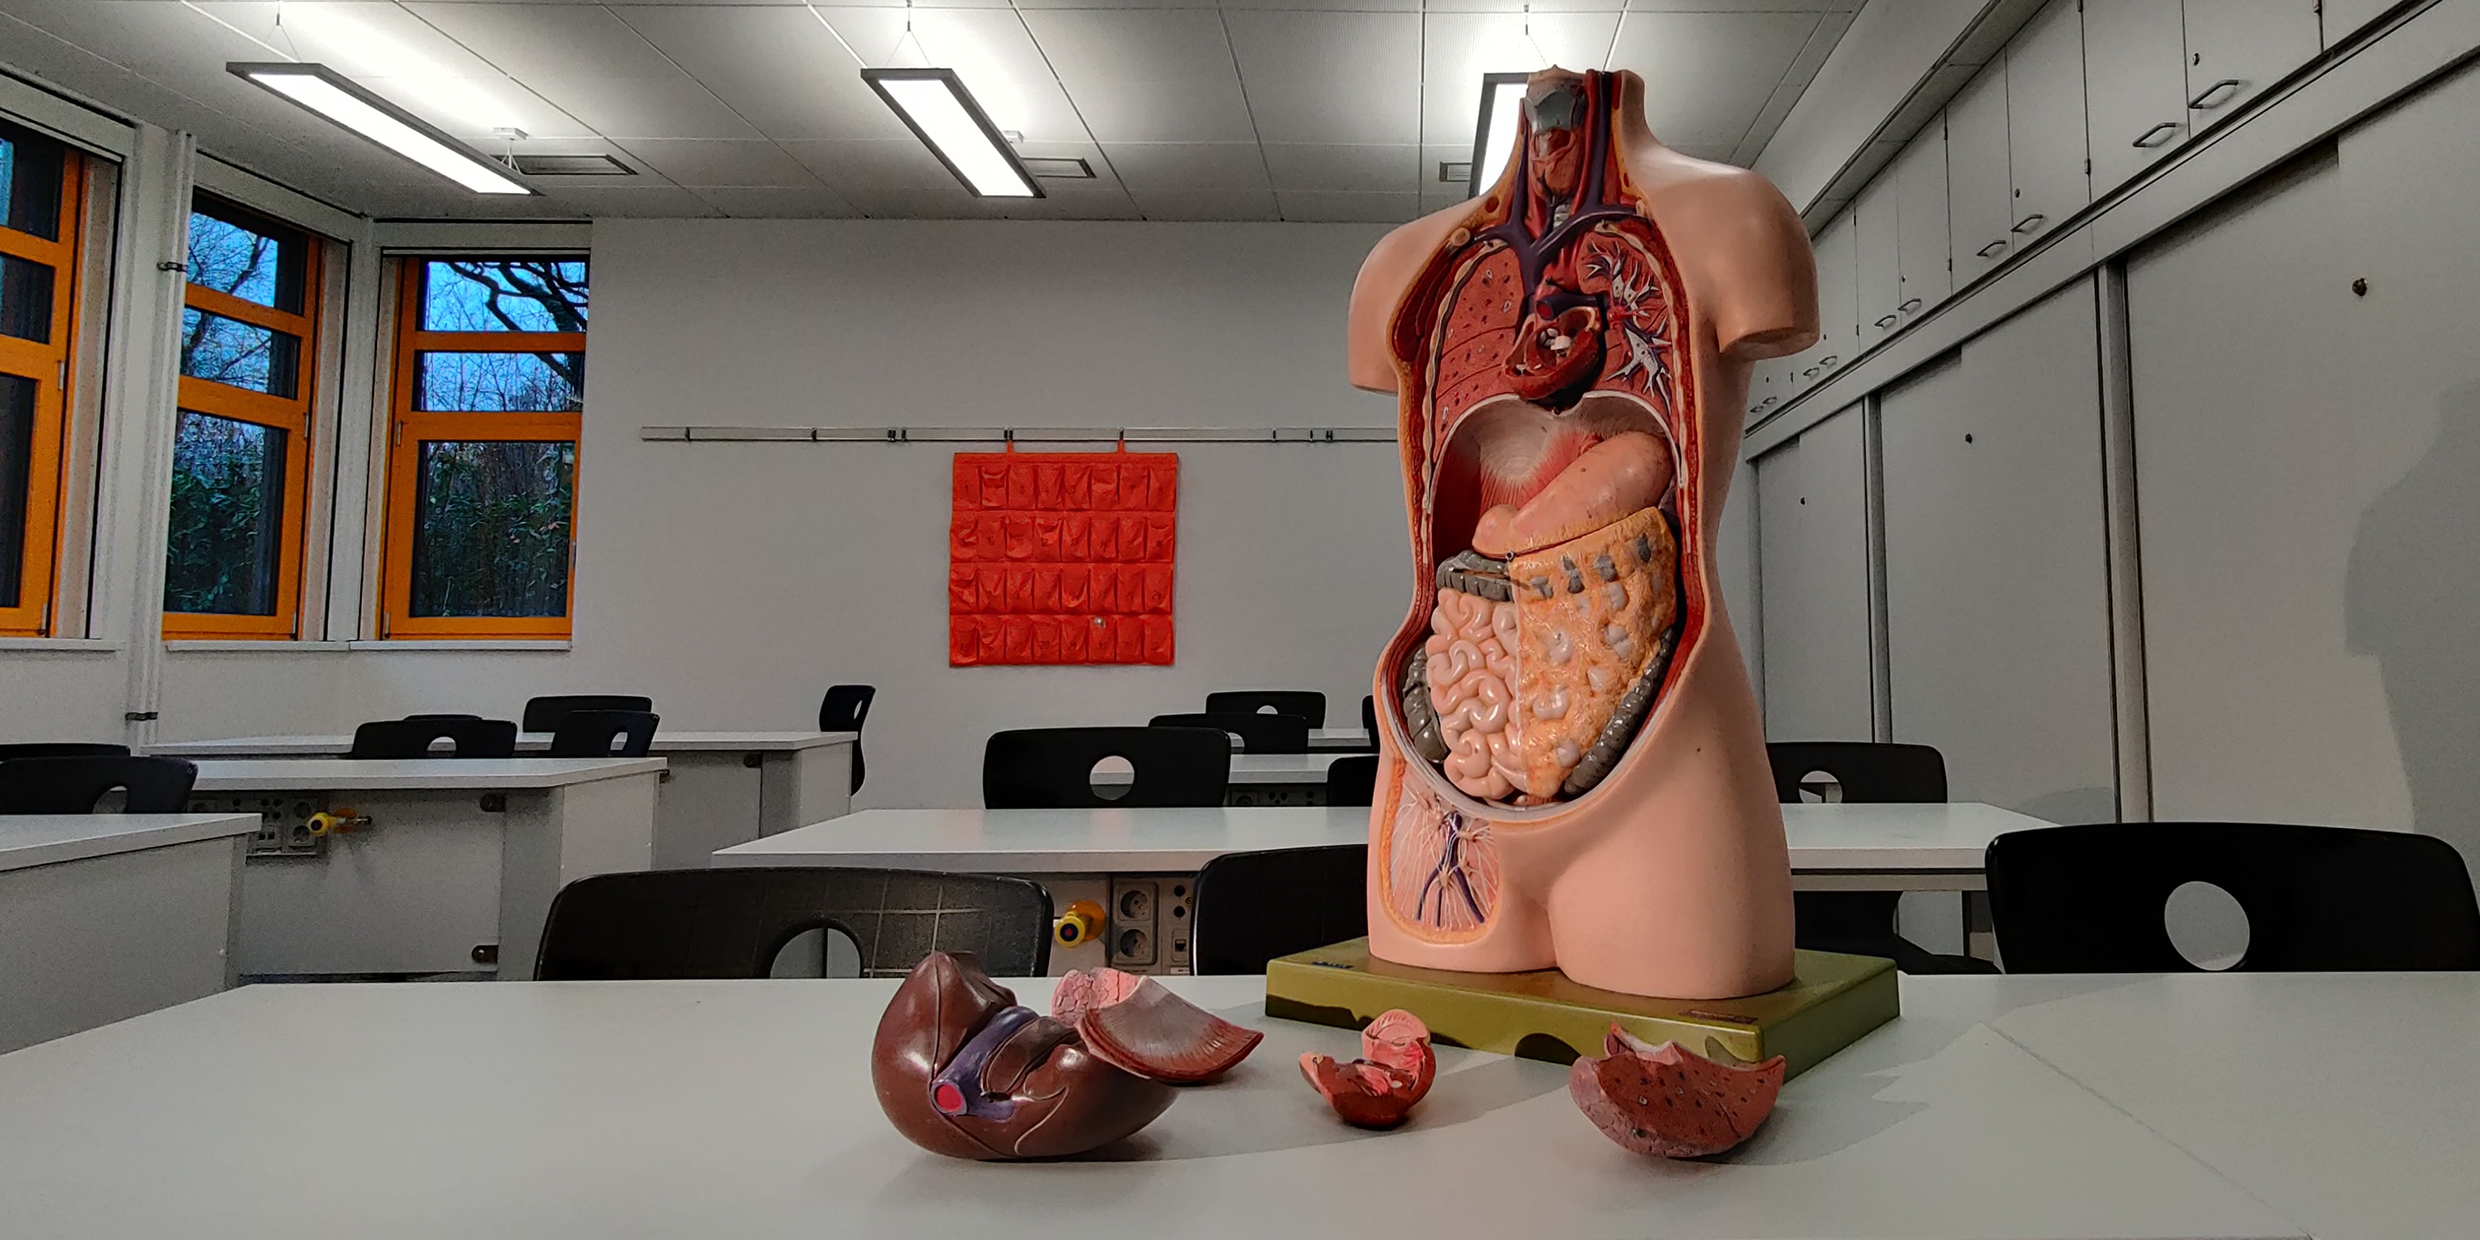 Image of a human anatomical model with the inner organs exposed